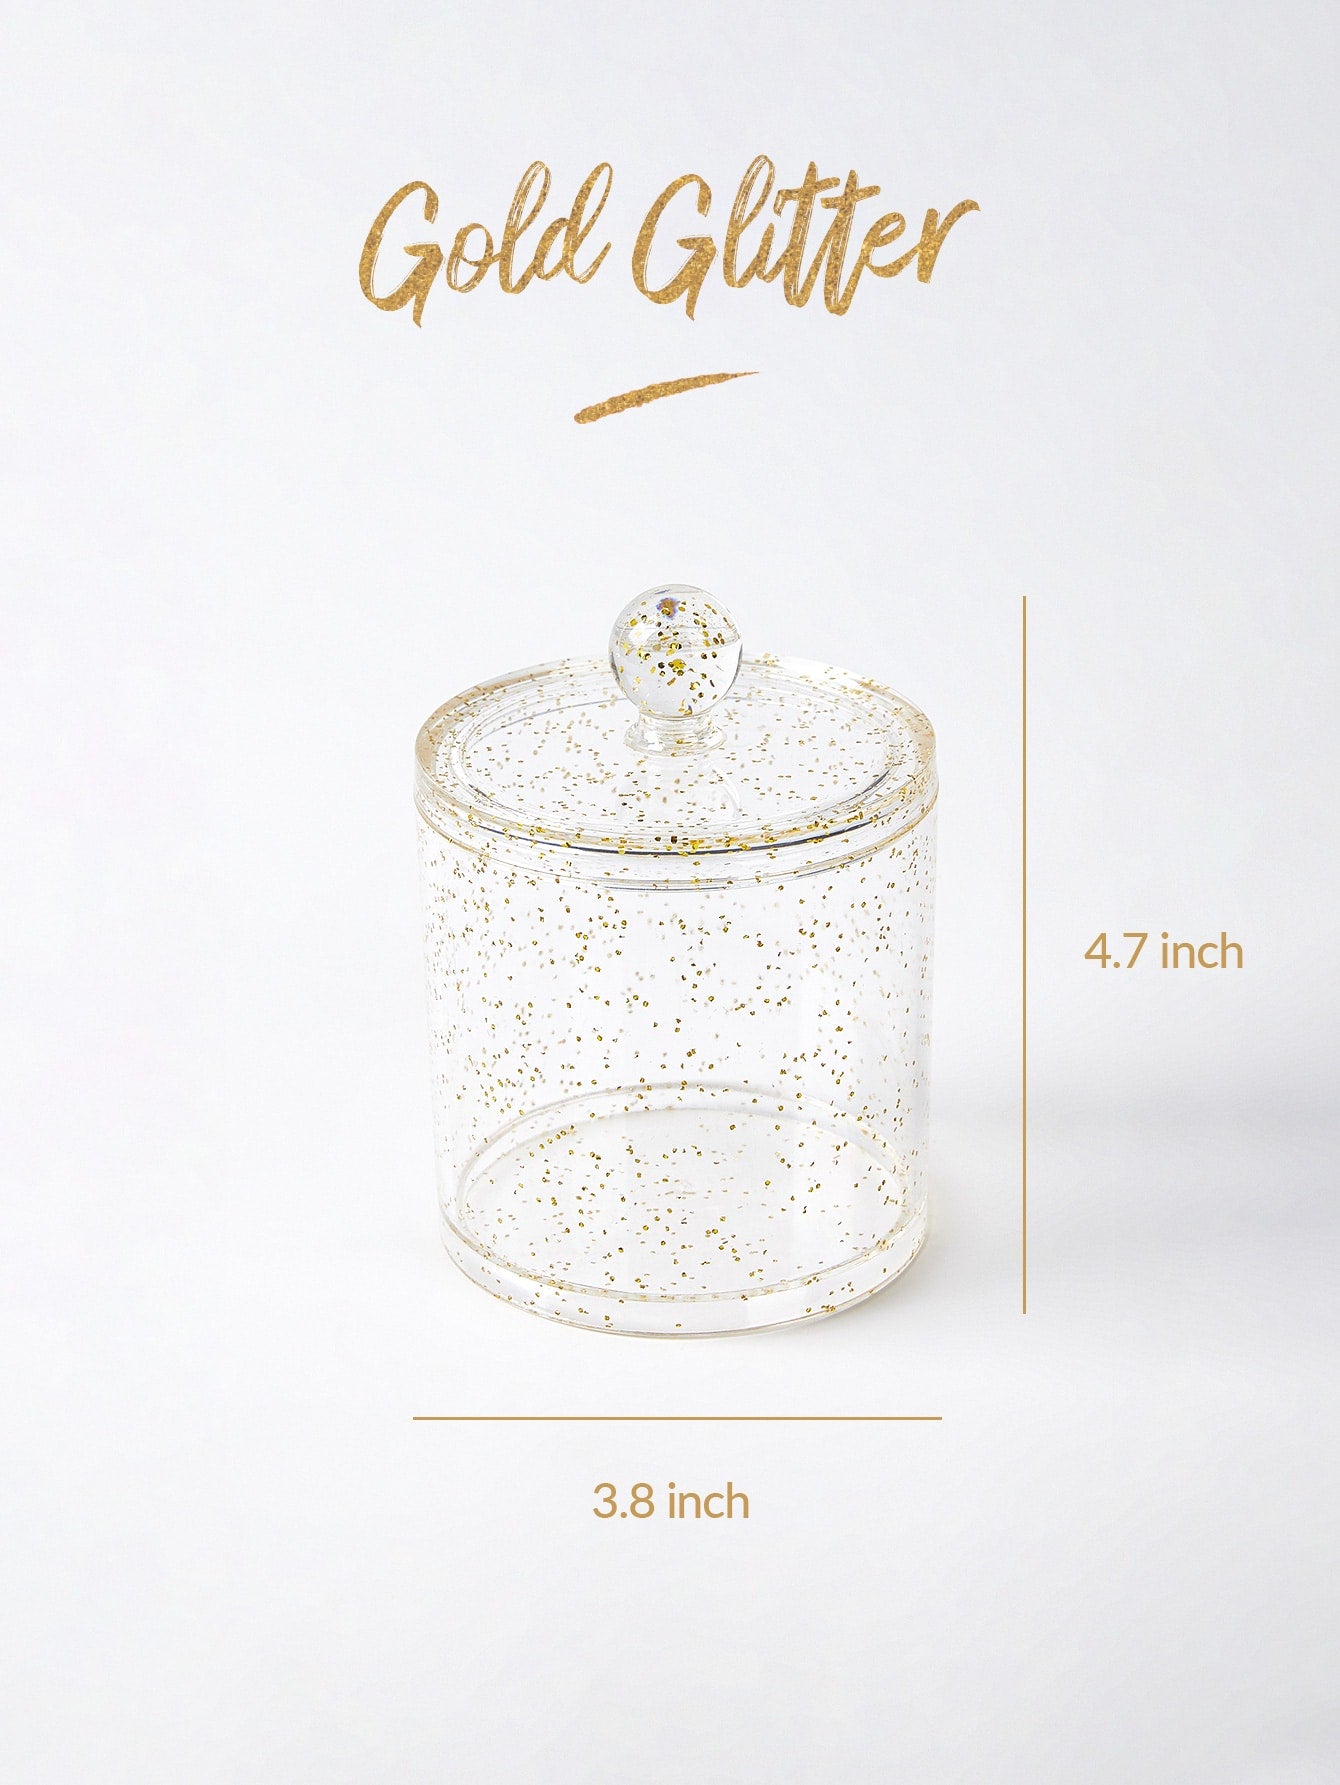 Round Container Makeup Organizer Gold Glitter Holiday Gift